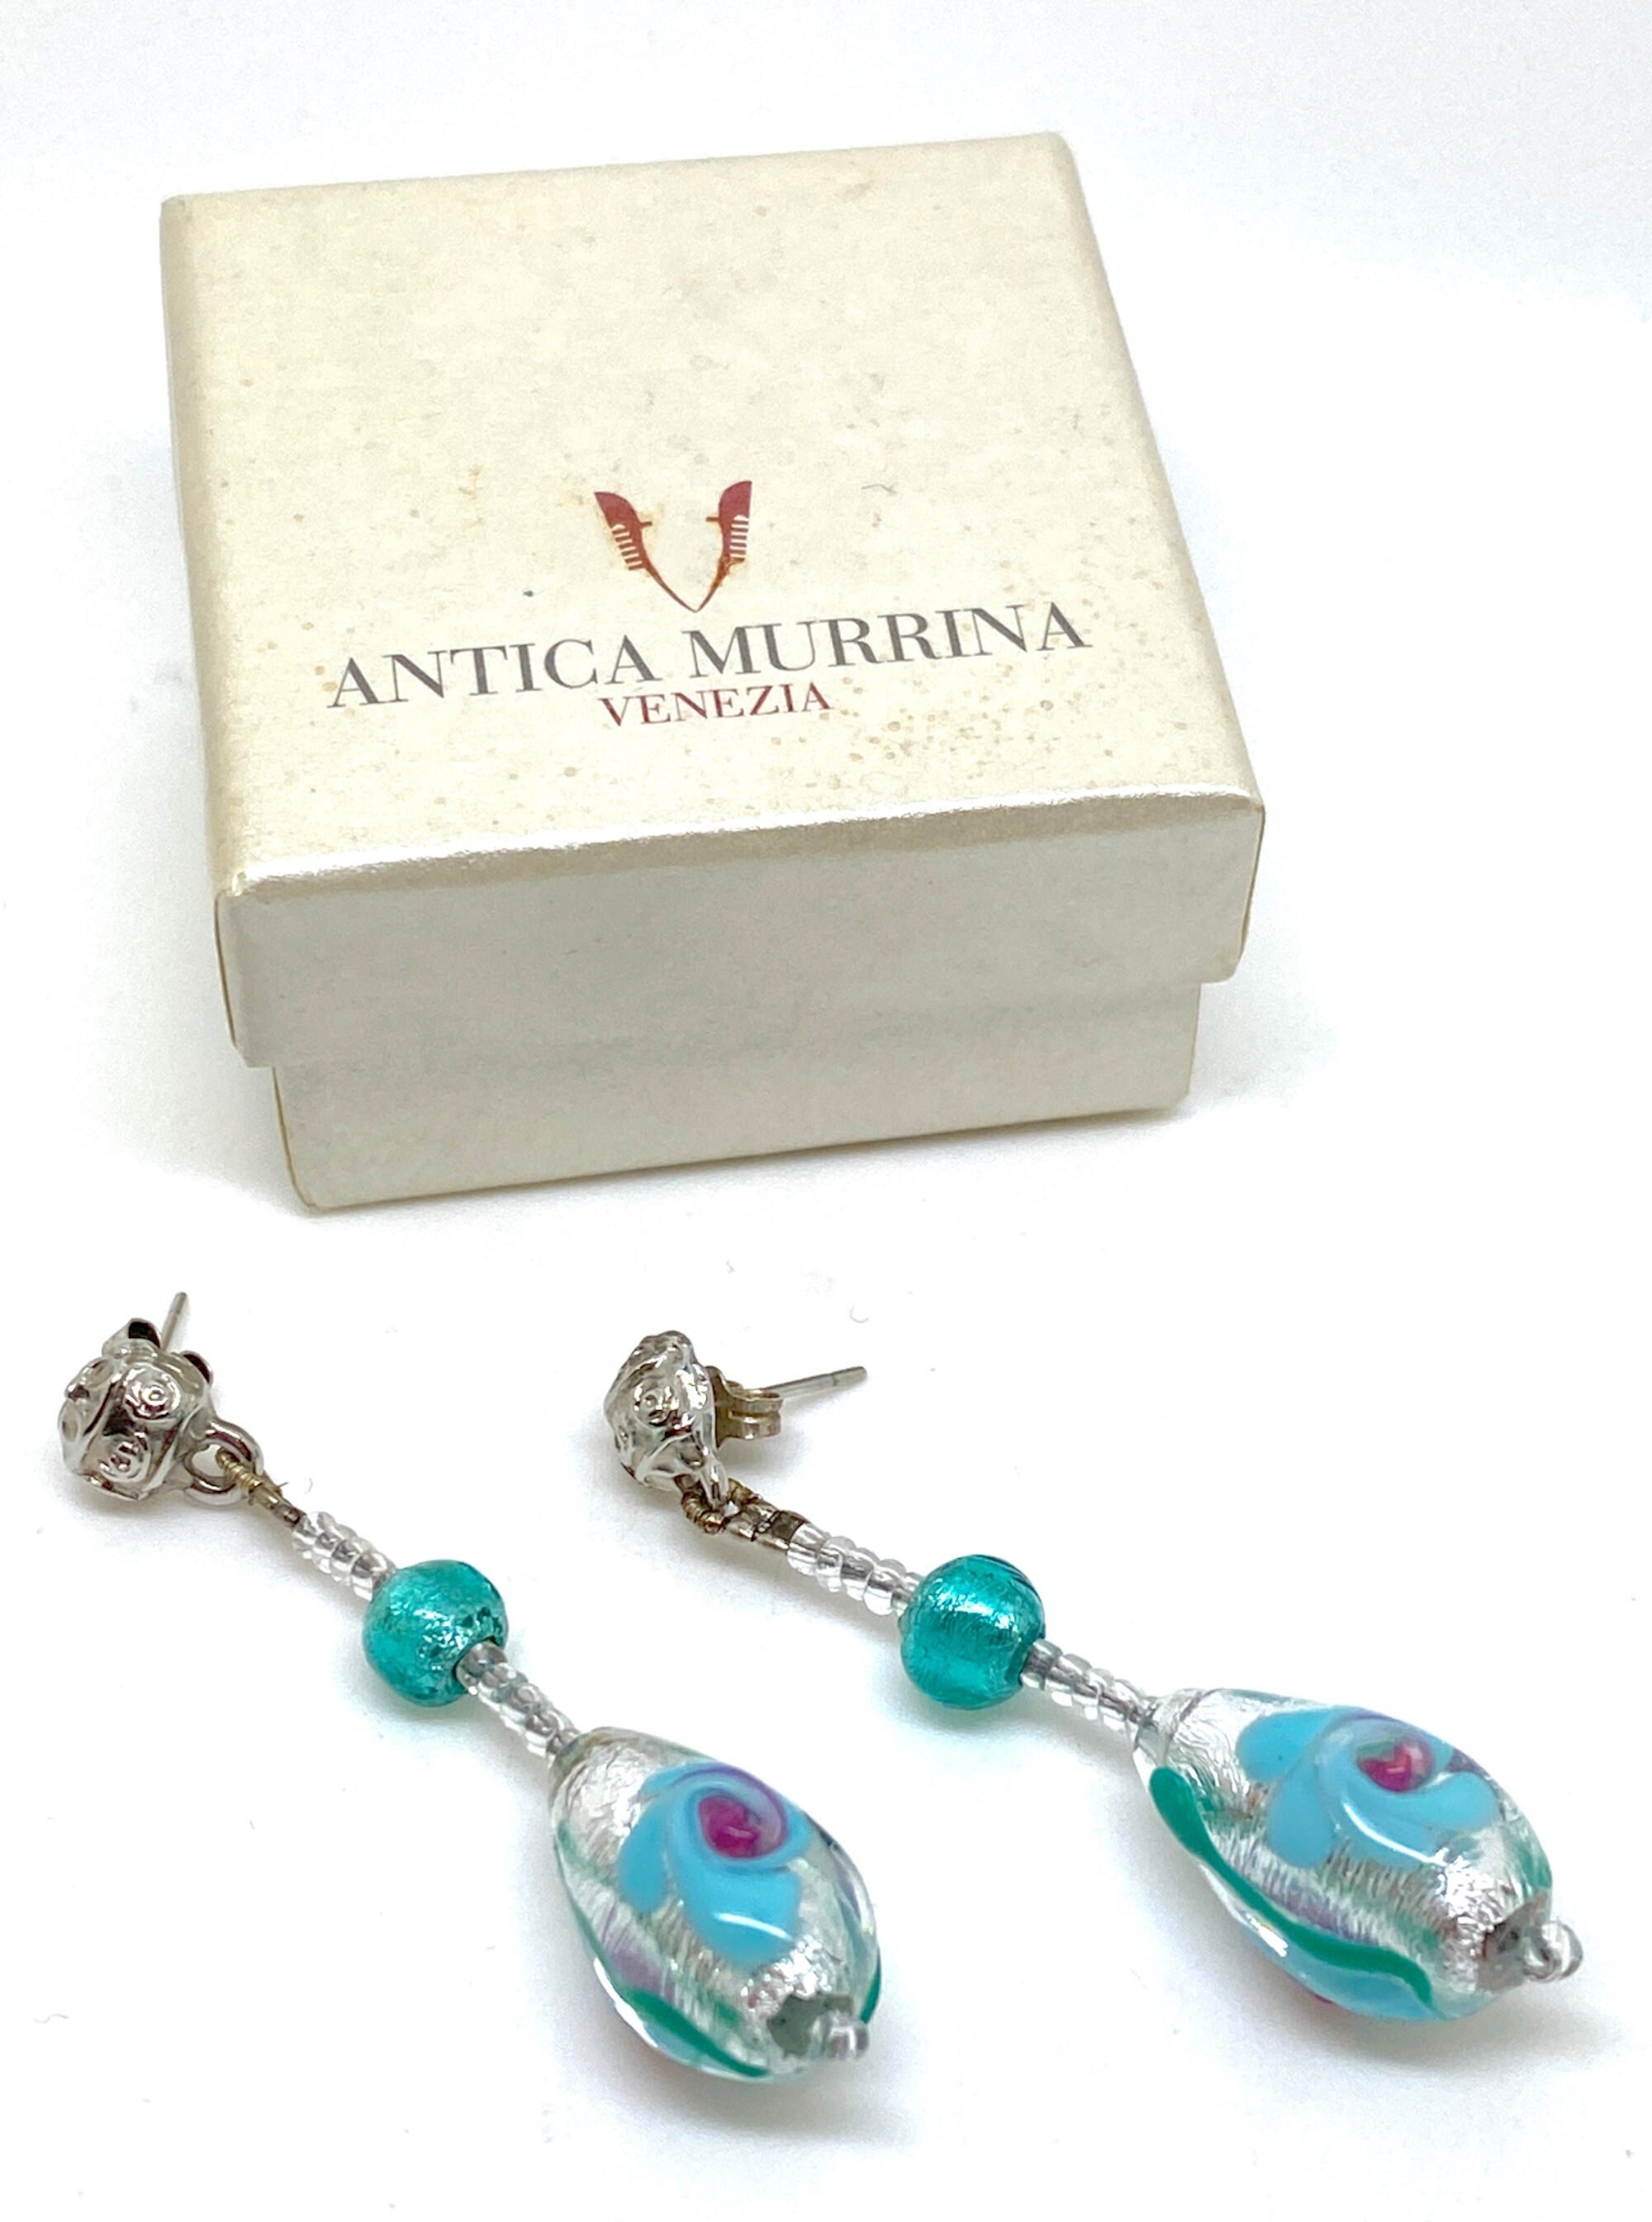 Murrina Millefiori Earrings, in Sterling Silver, 18 mm in diameter  (Available in 15 assorted Colours) - Murrina.it